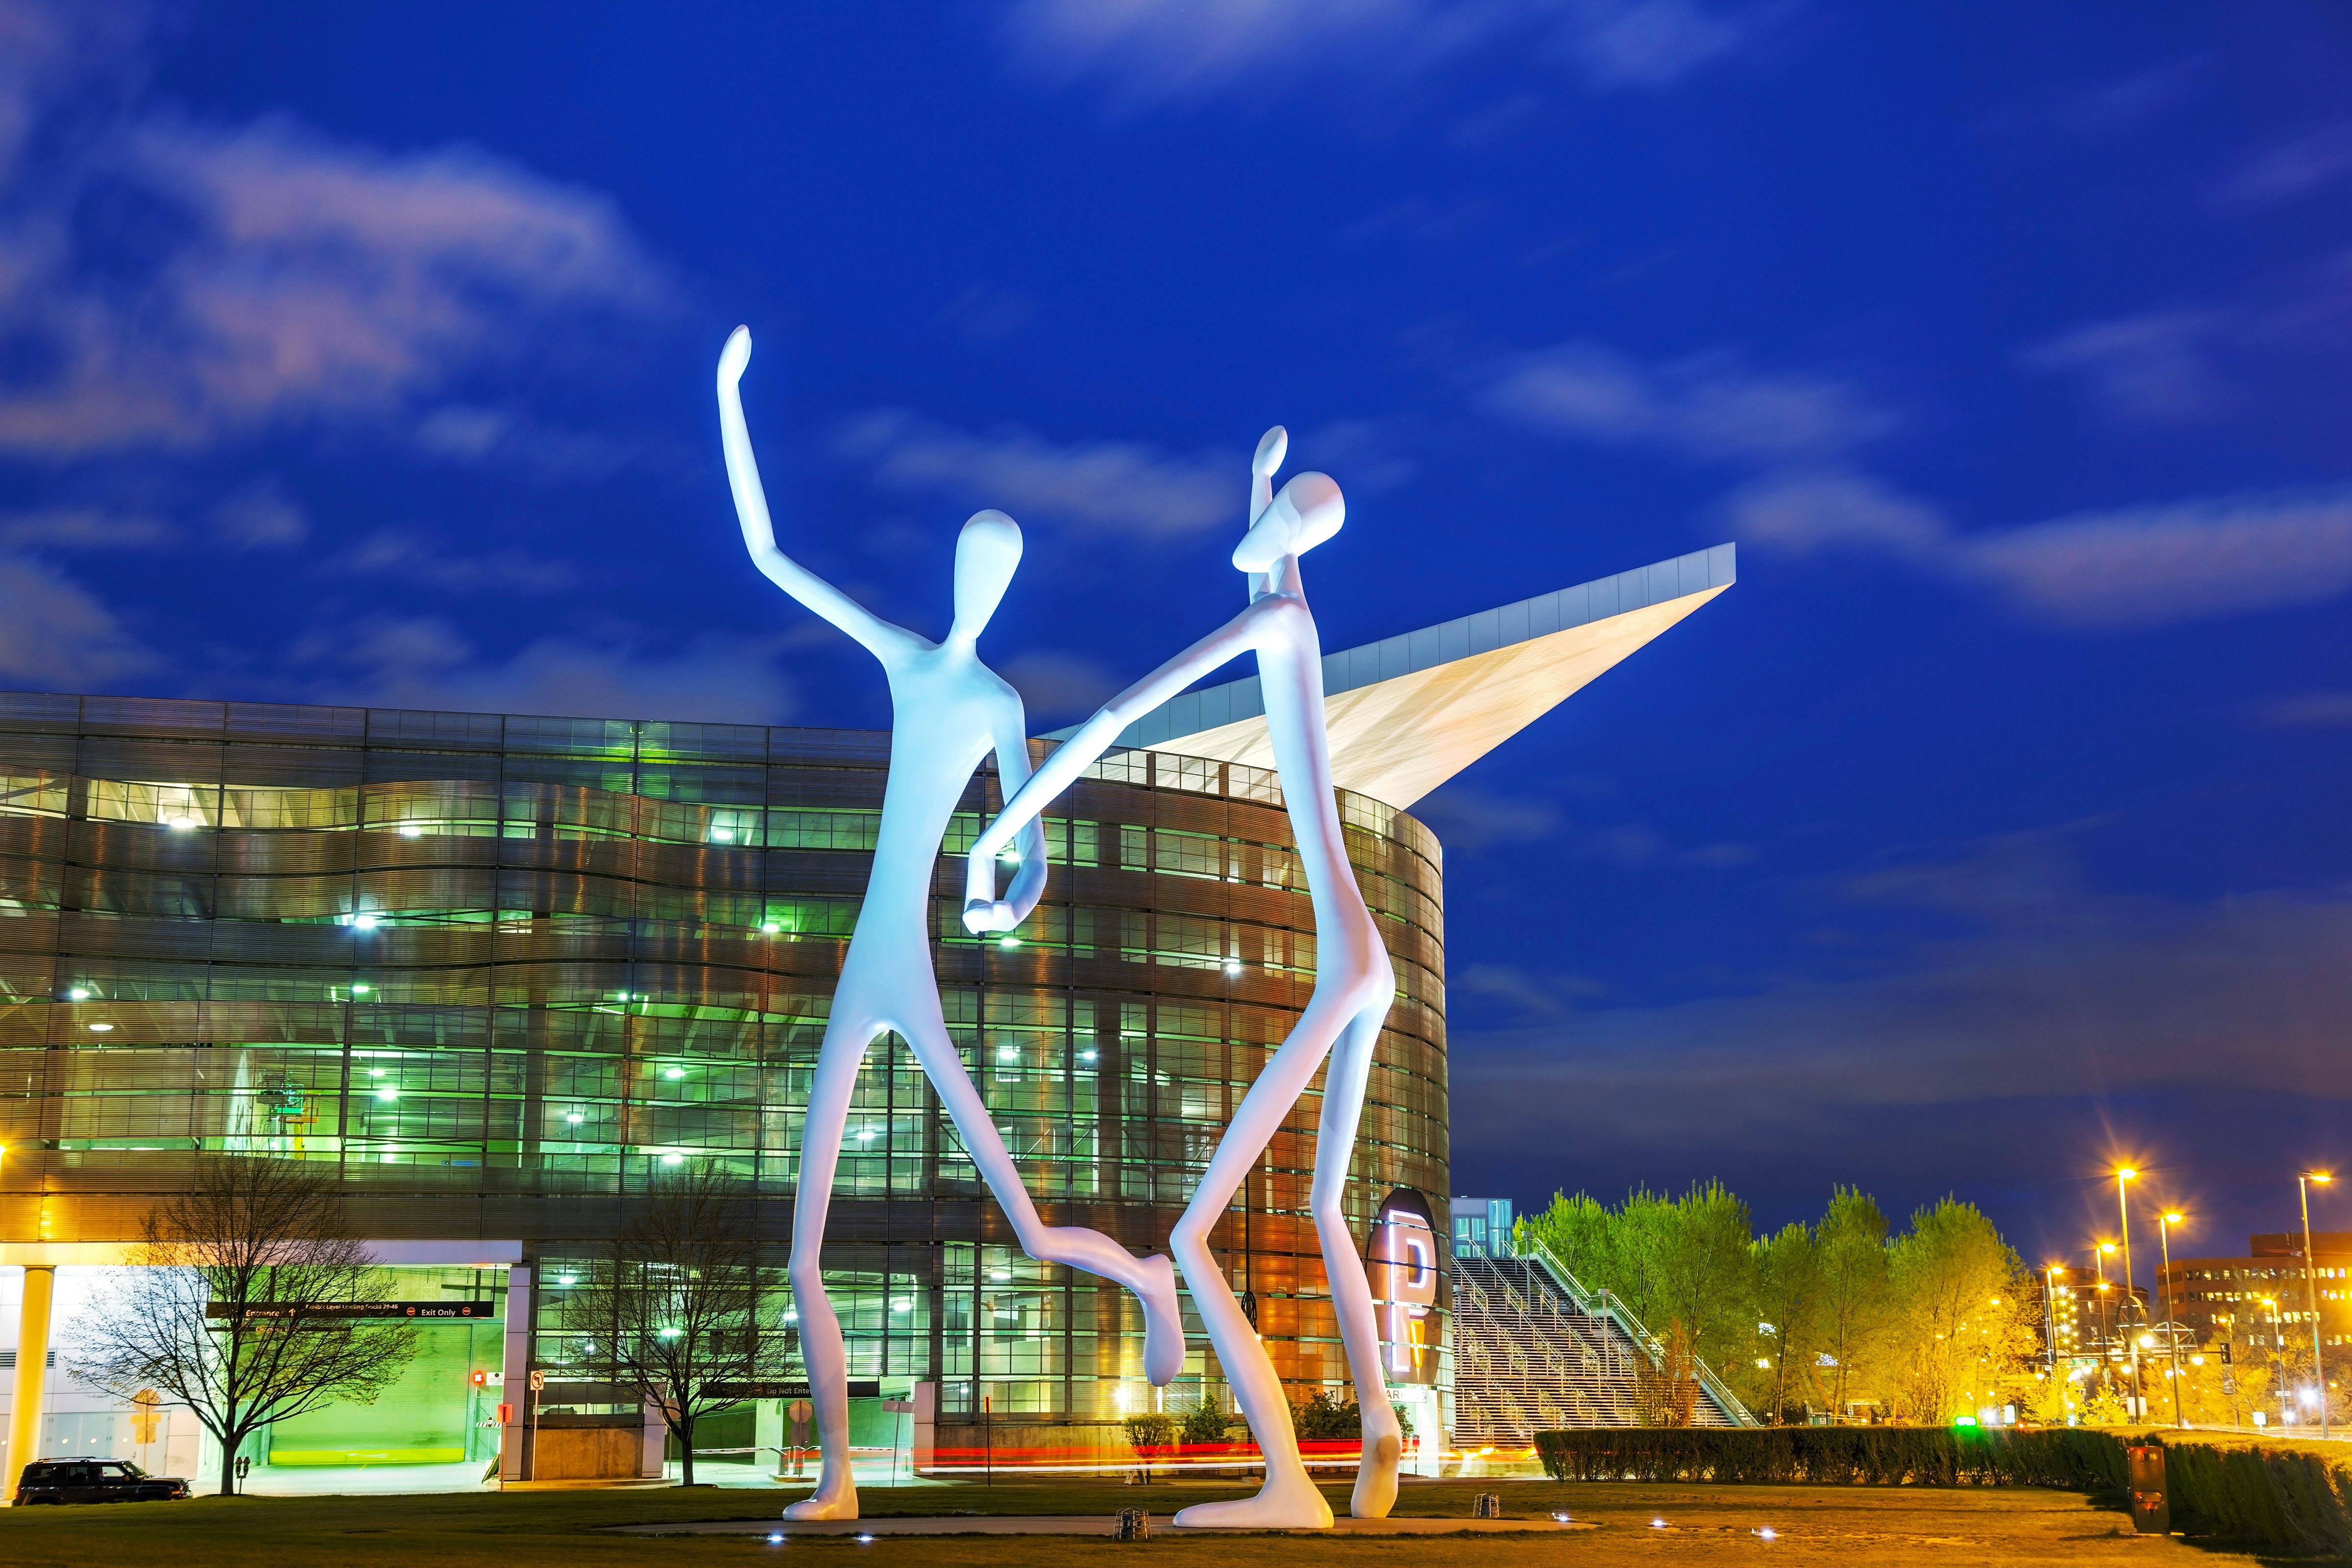 Tall human-like sculptures stand in front of a glass building under a night sky